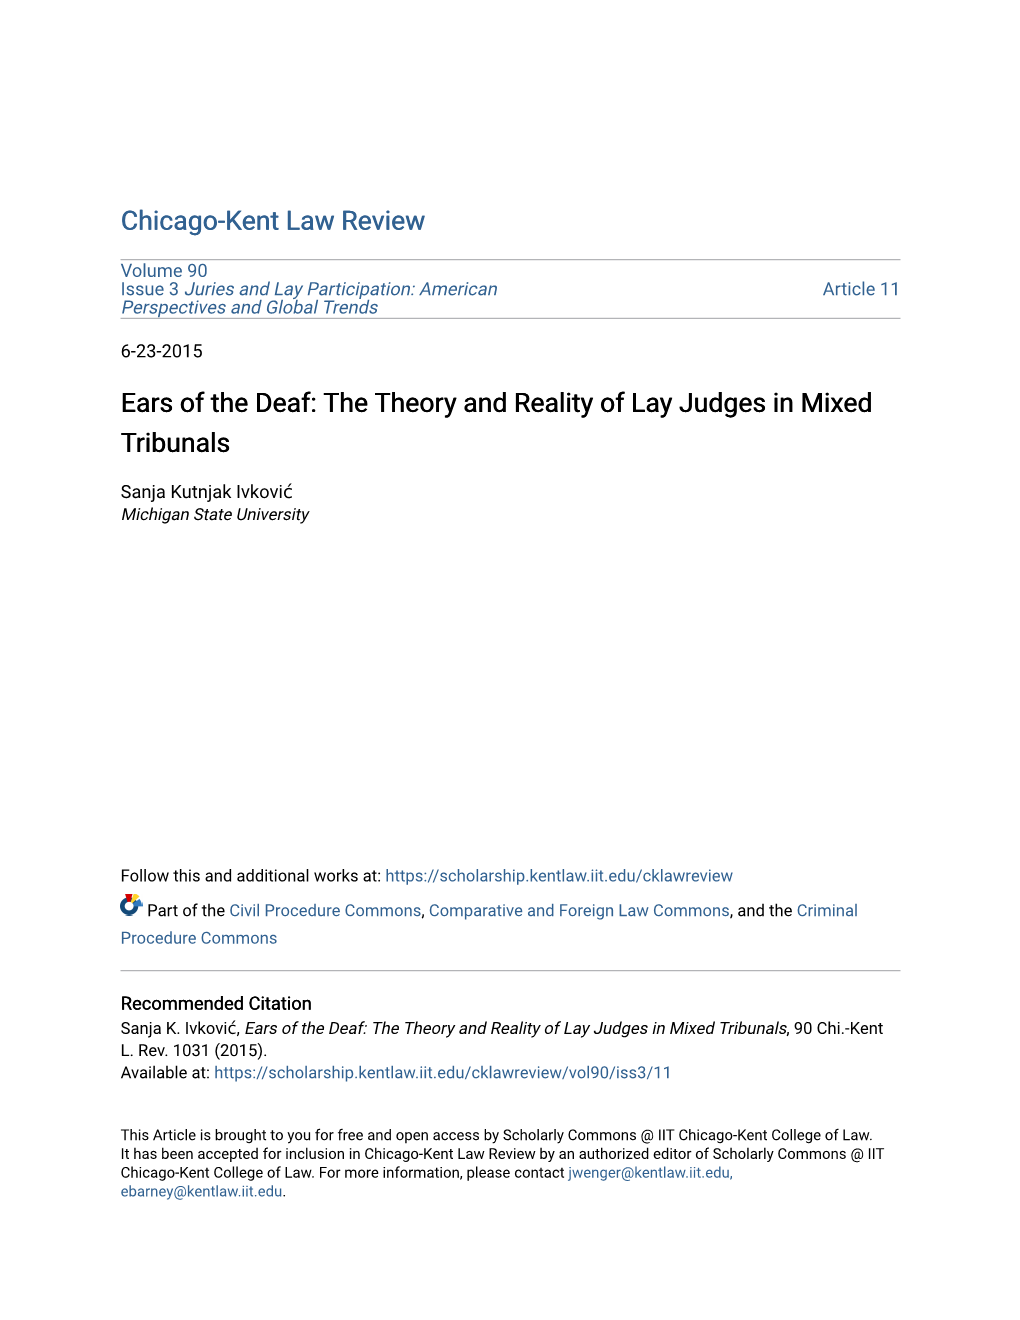 The Theory and Reality of Lay Judges in Mixed Tribunals